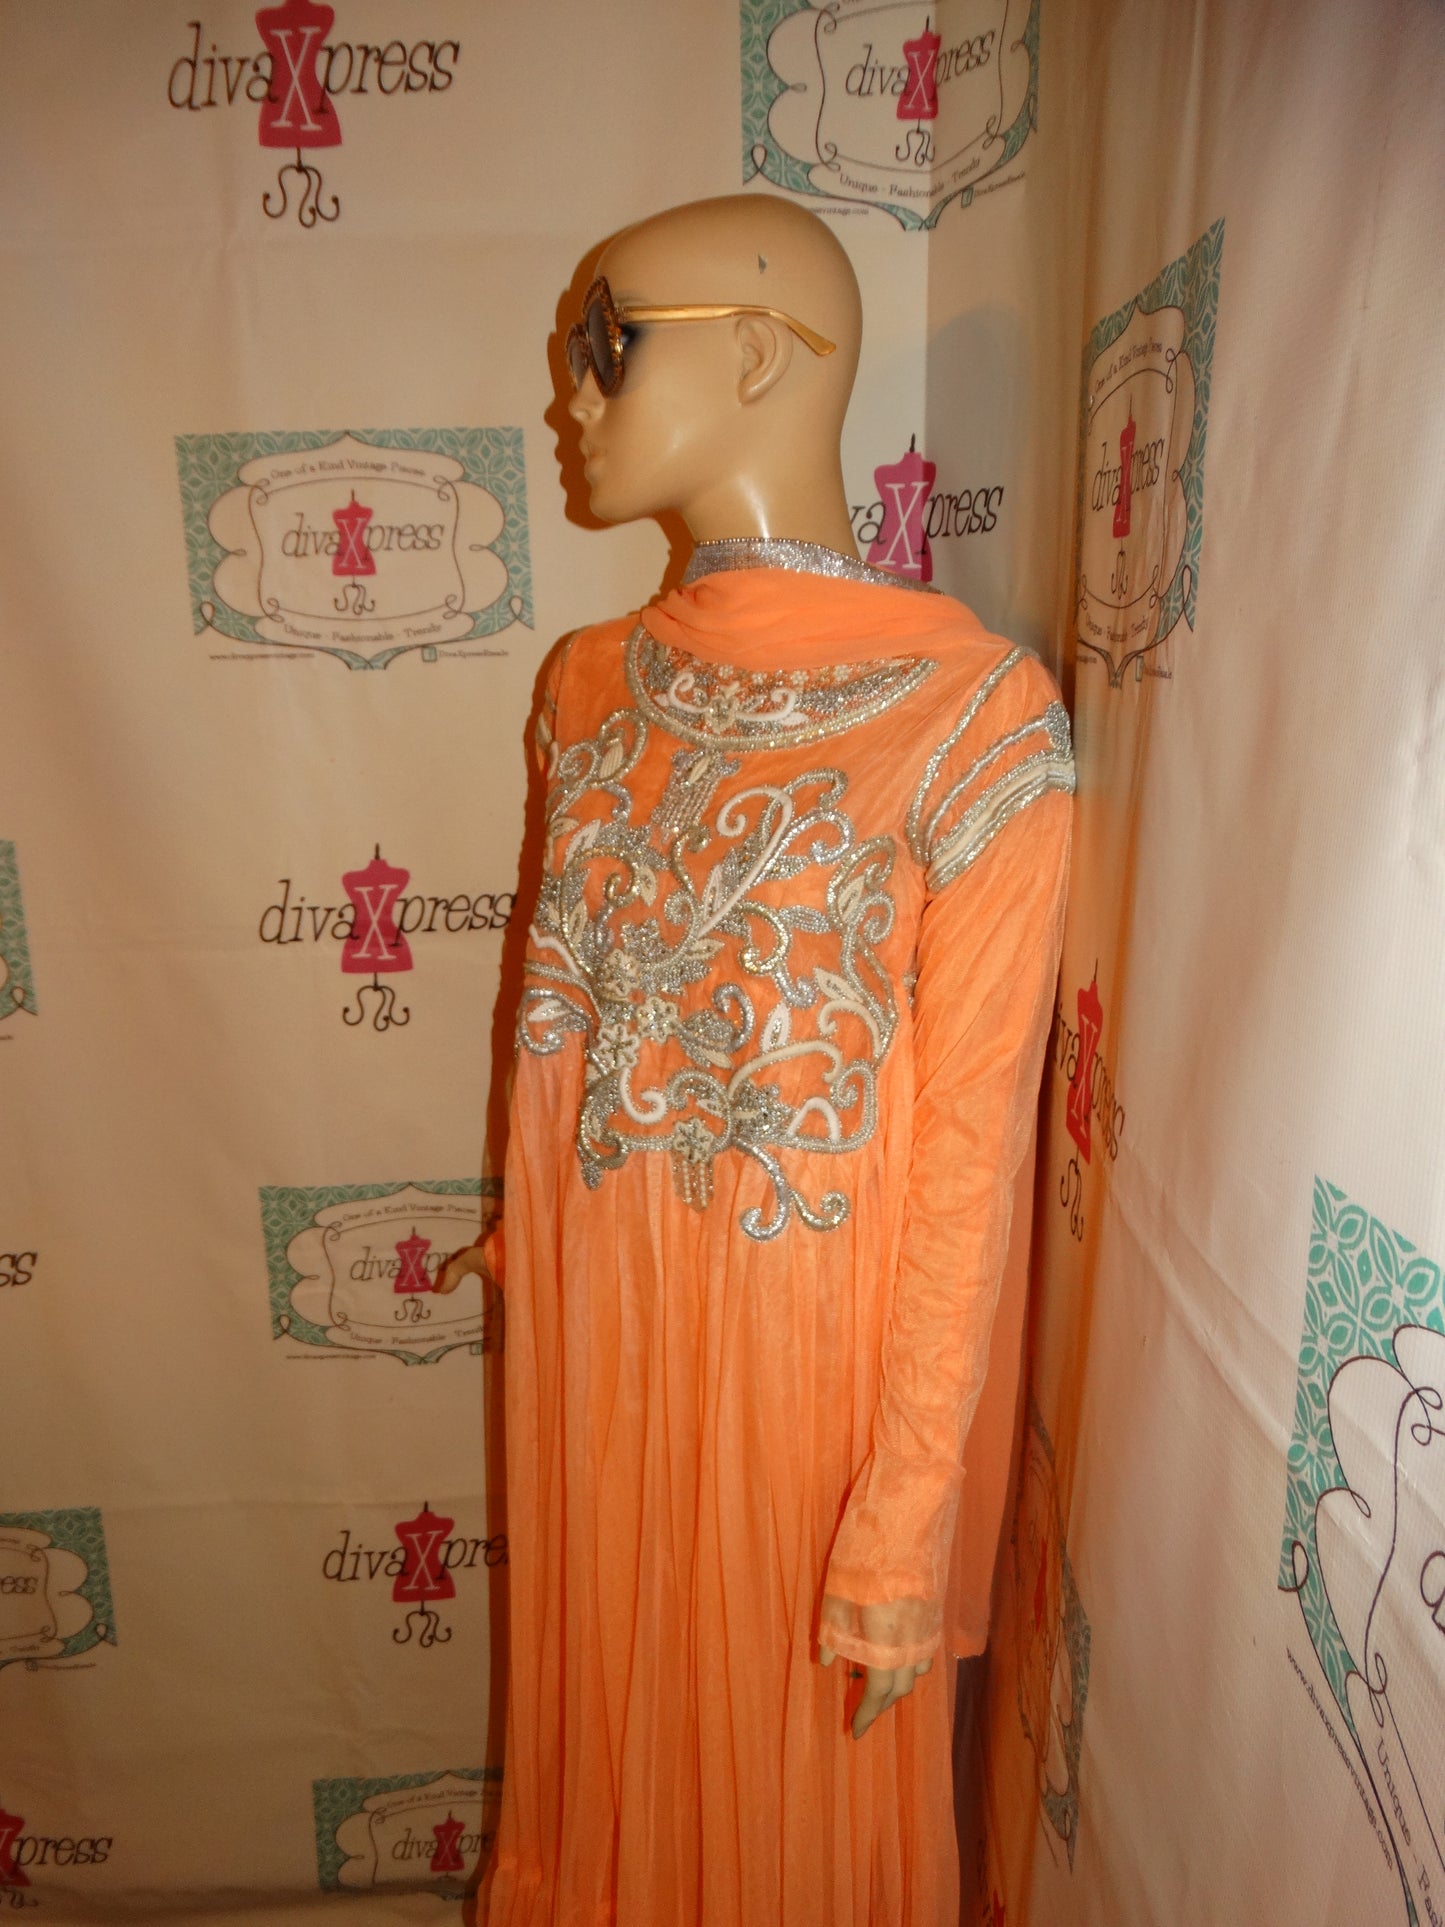 Vintage Peach/ Silver Heavy Lace Beaded Dress With XXL Scarf Size M